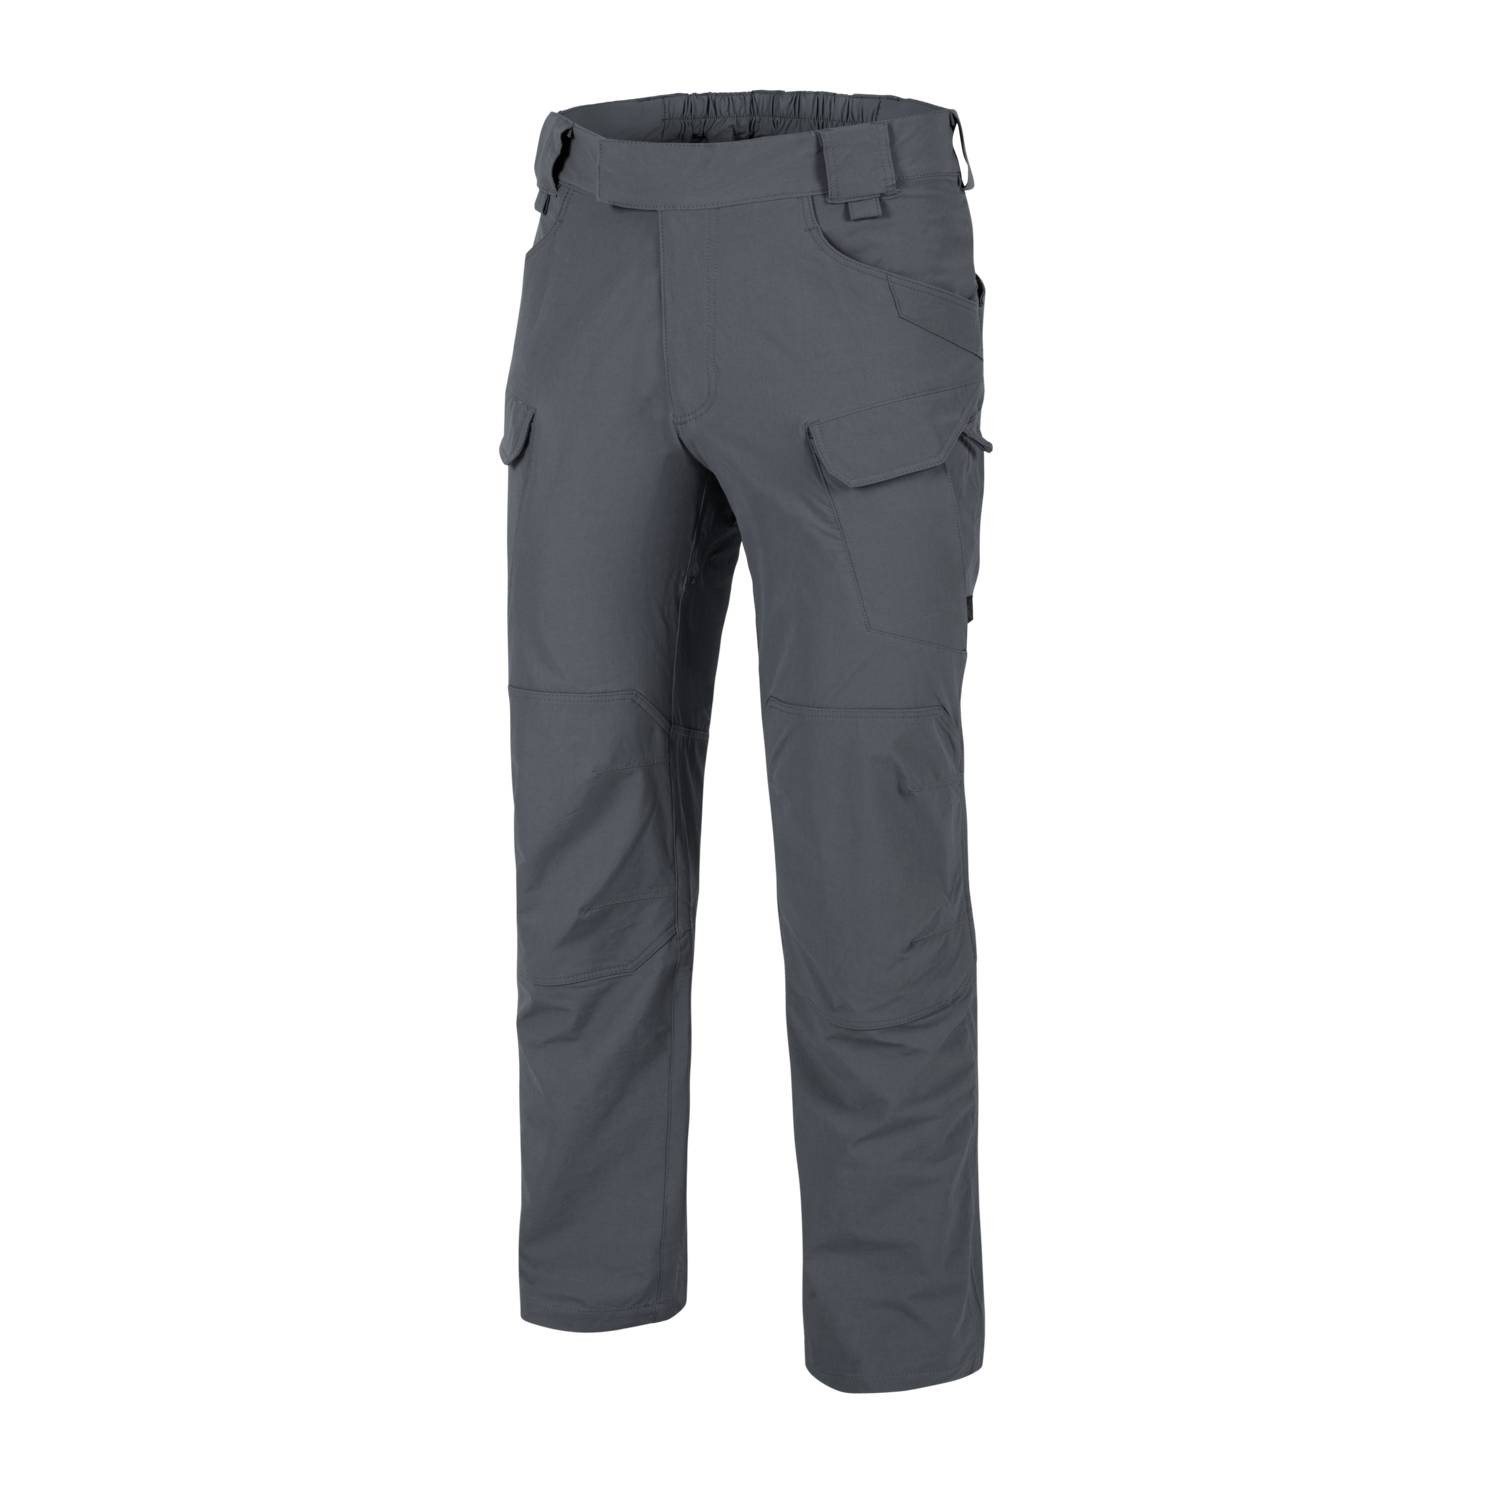 Kalhoty OUTDOOR TACTICAL LITE® SHADOW GREY Velikost: L-XL